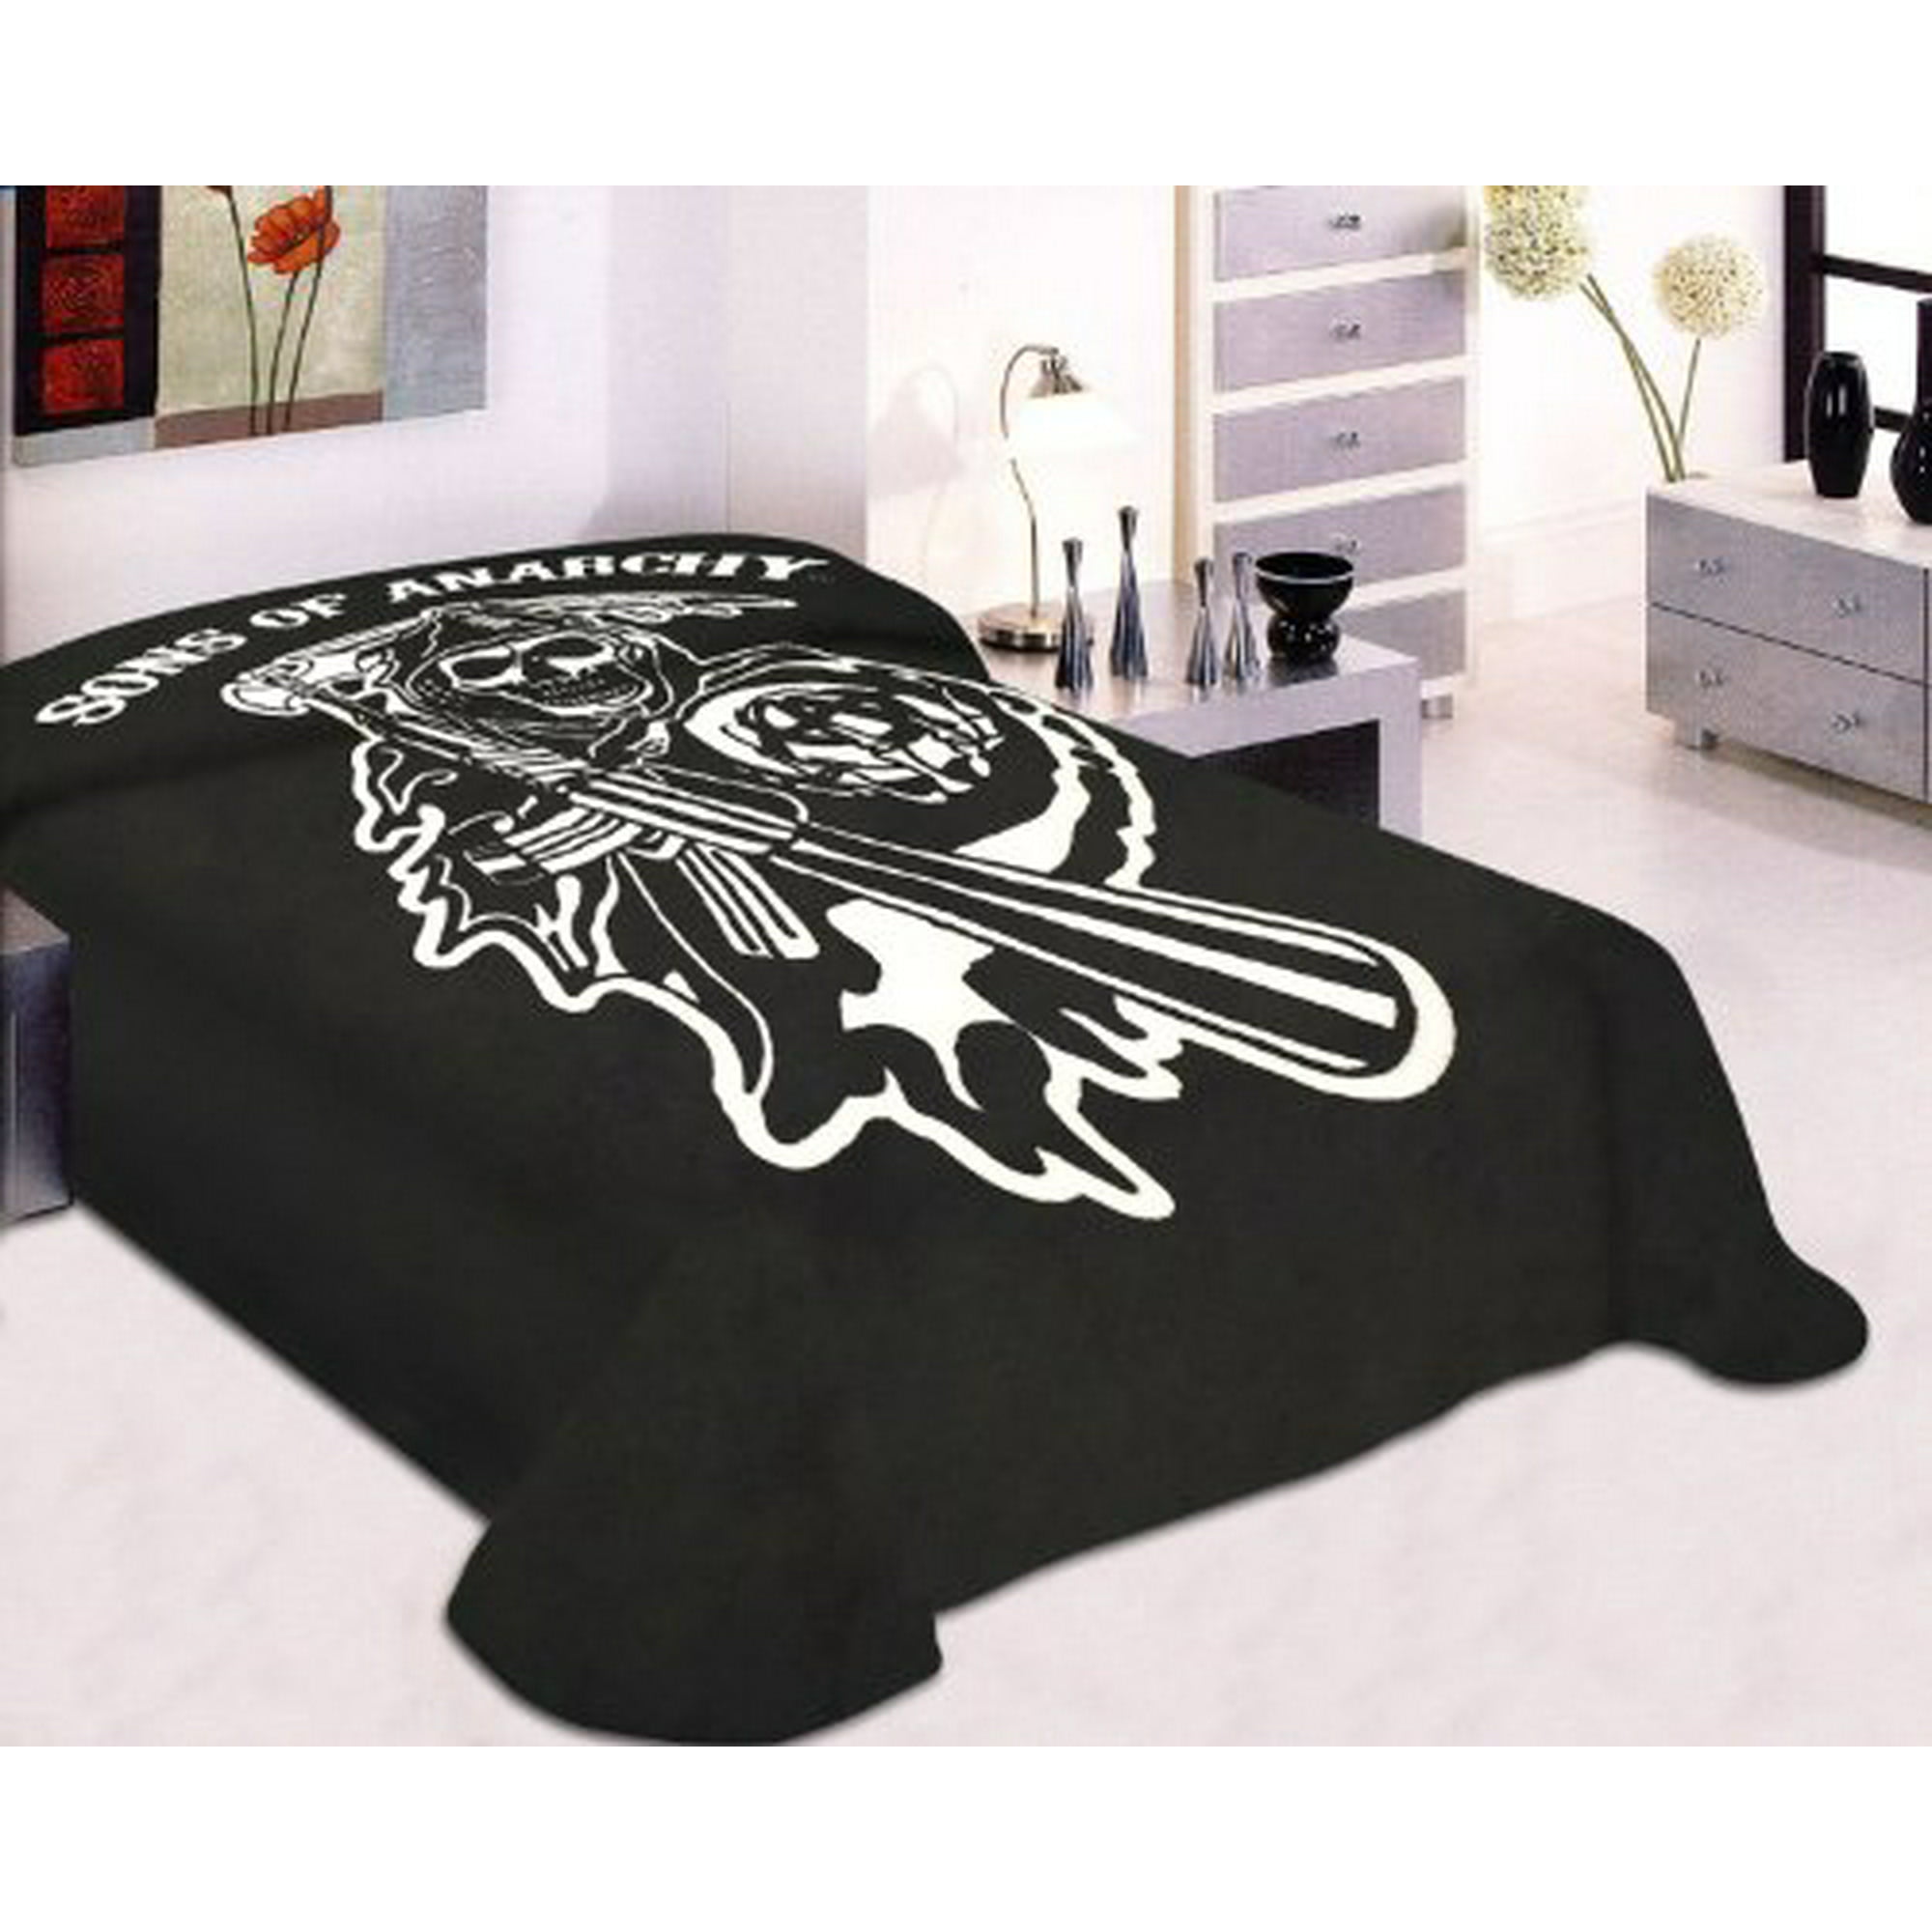 94 Plush Queen Size Blanket Samcro, Sons Of Anarchy Duvet Cover